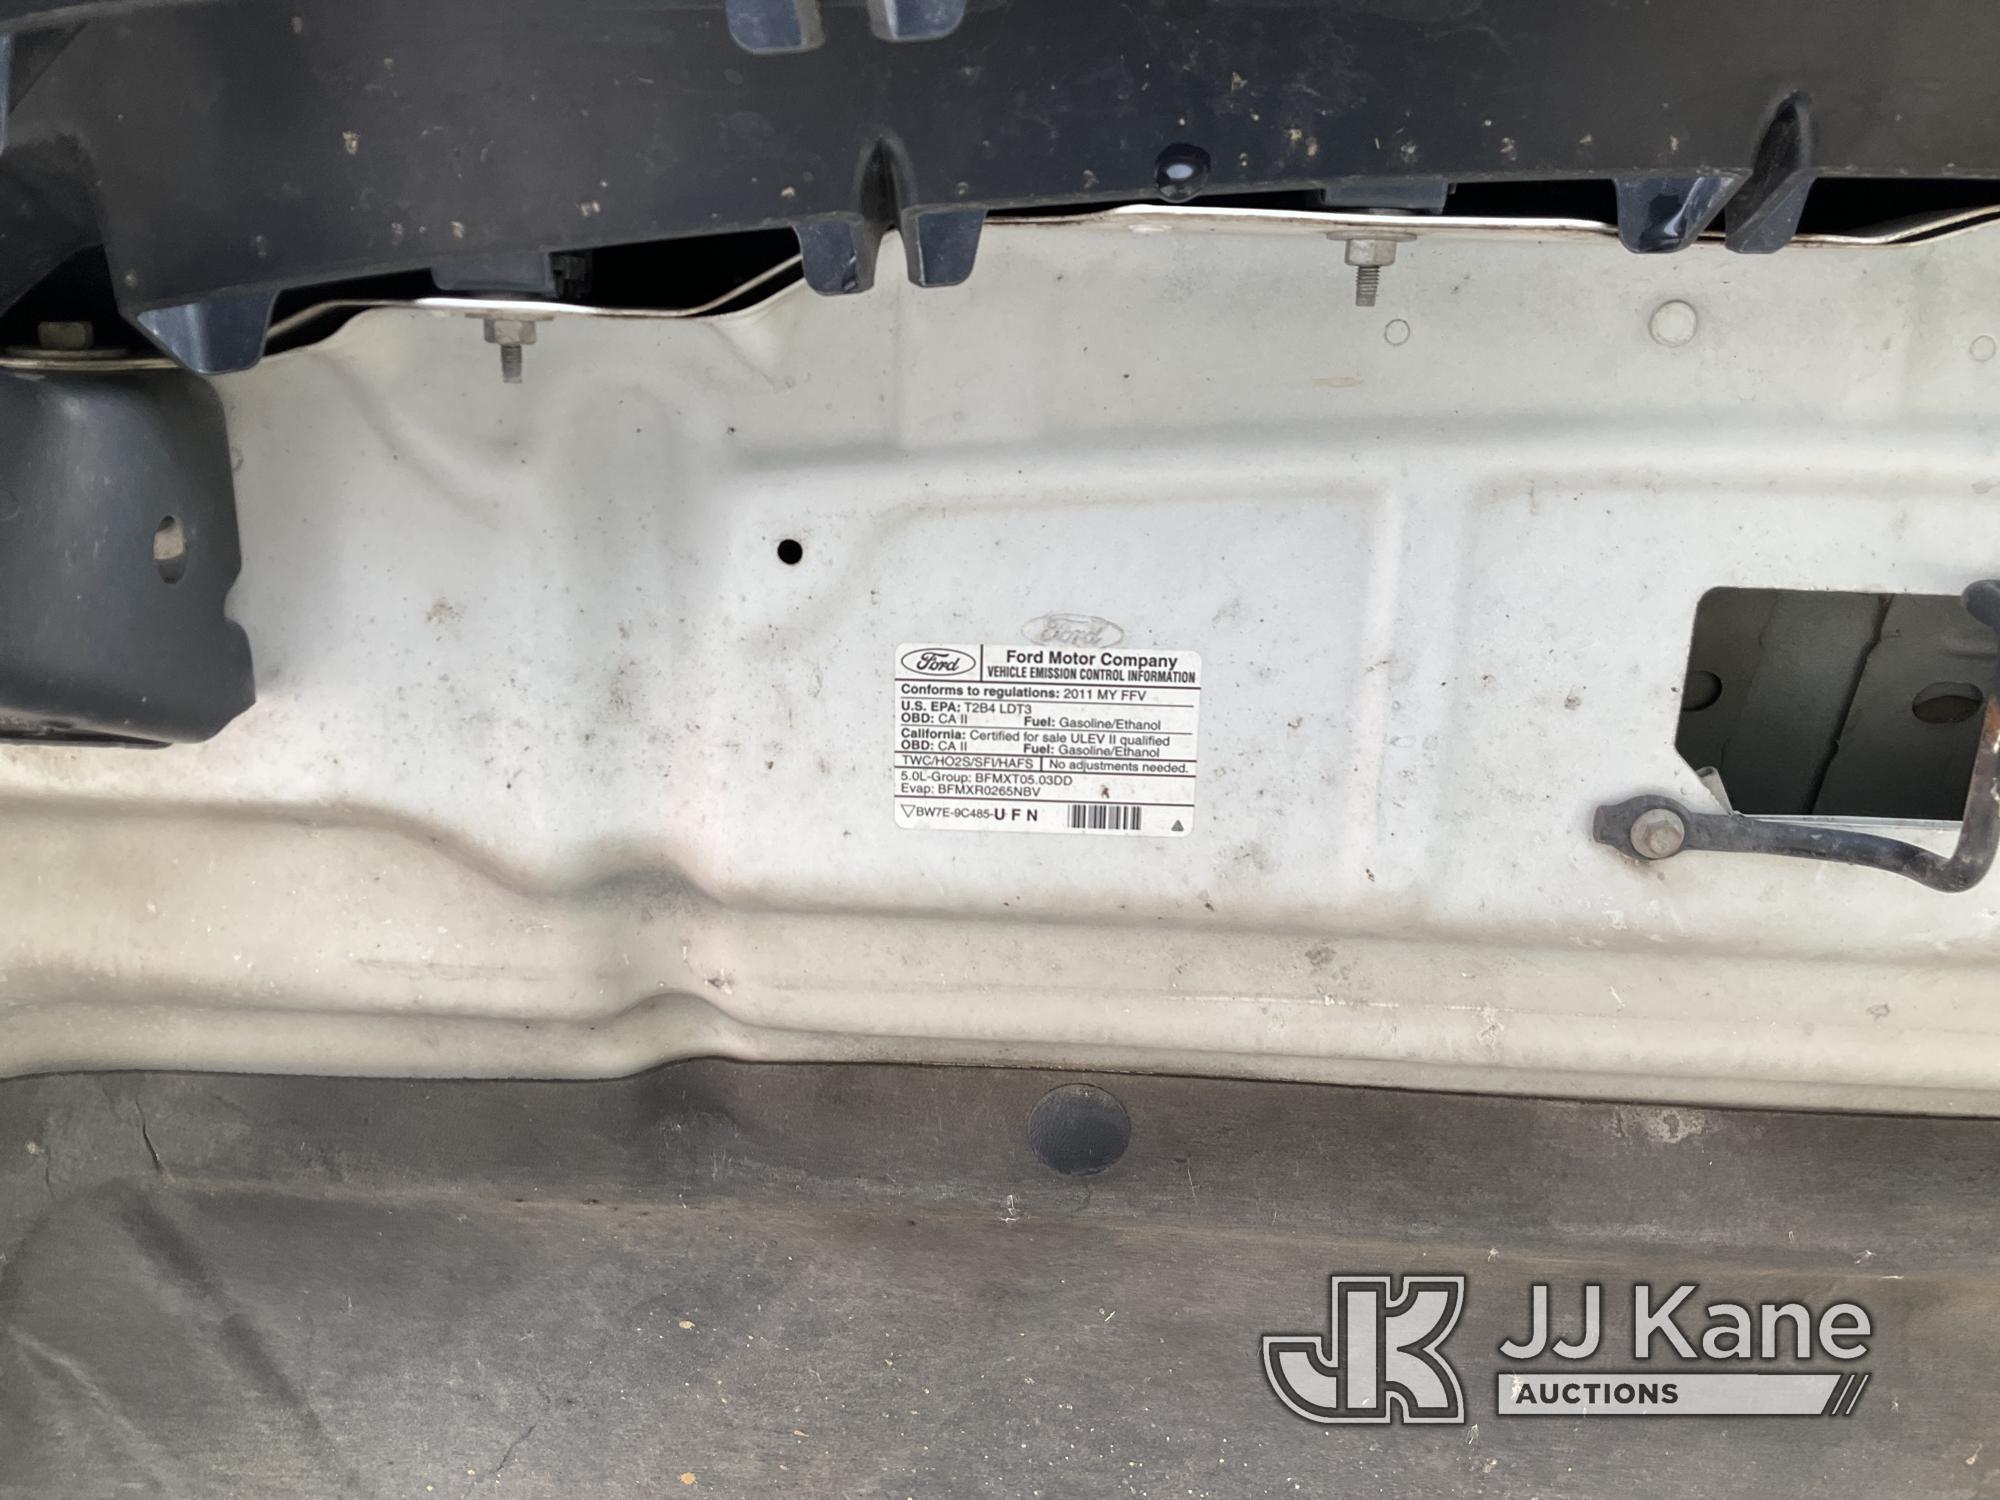 (Hawk Point, MO) 2011 Ford F150 4x4 Pickup Truck Power to dash, non running, unknown condition.